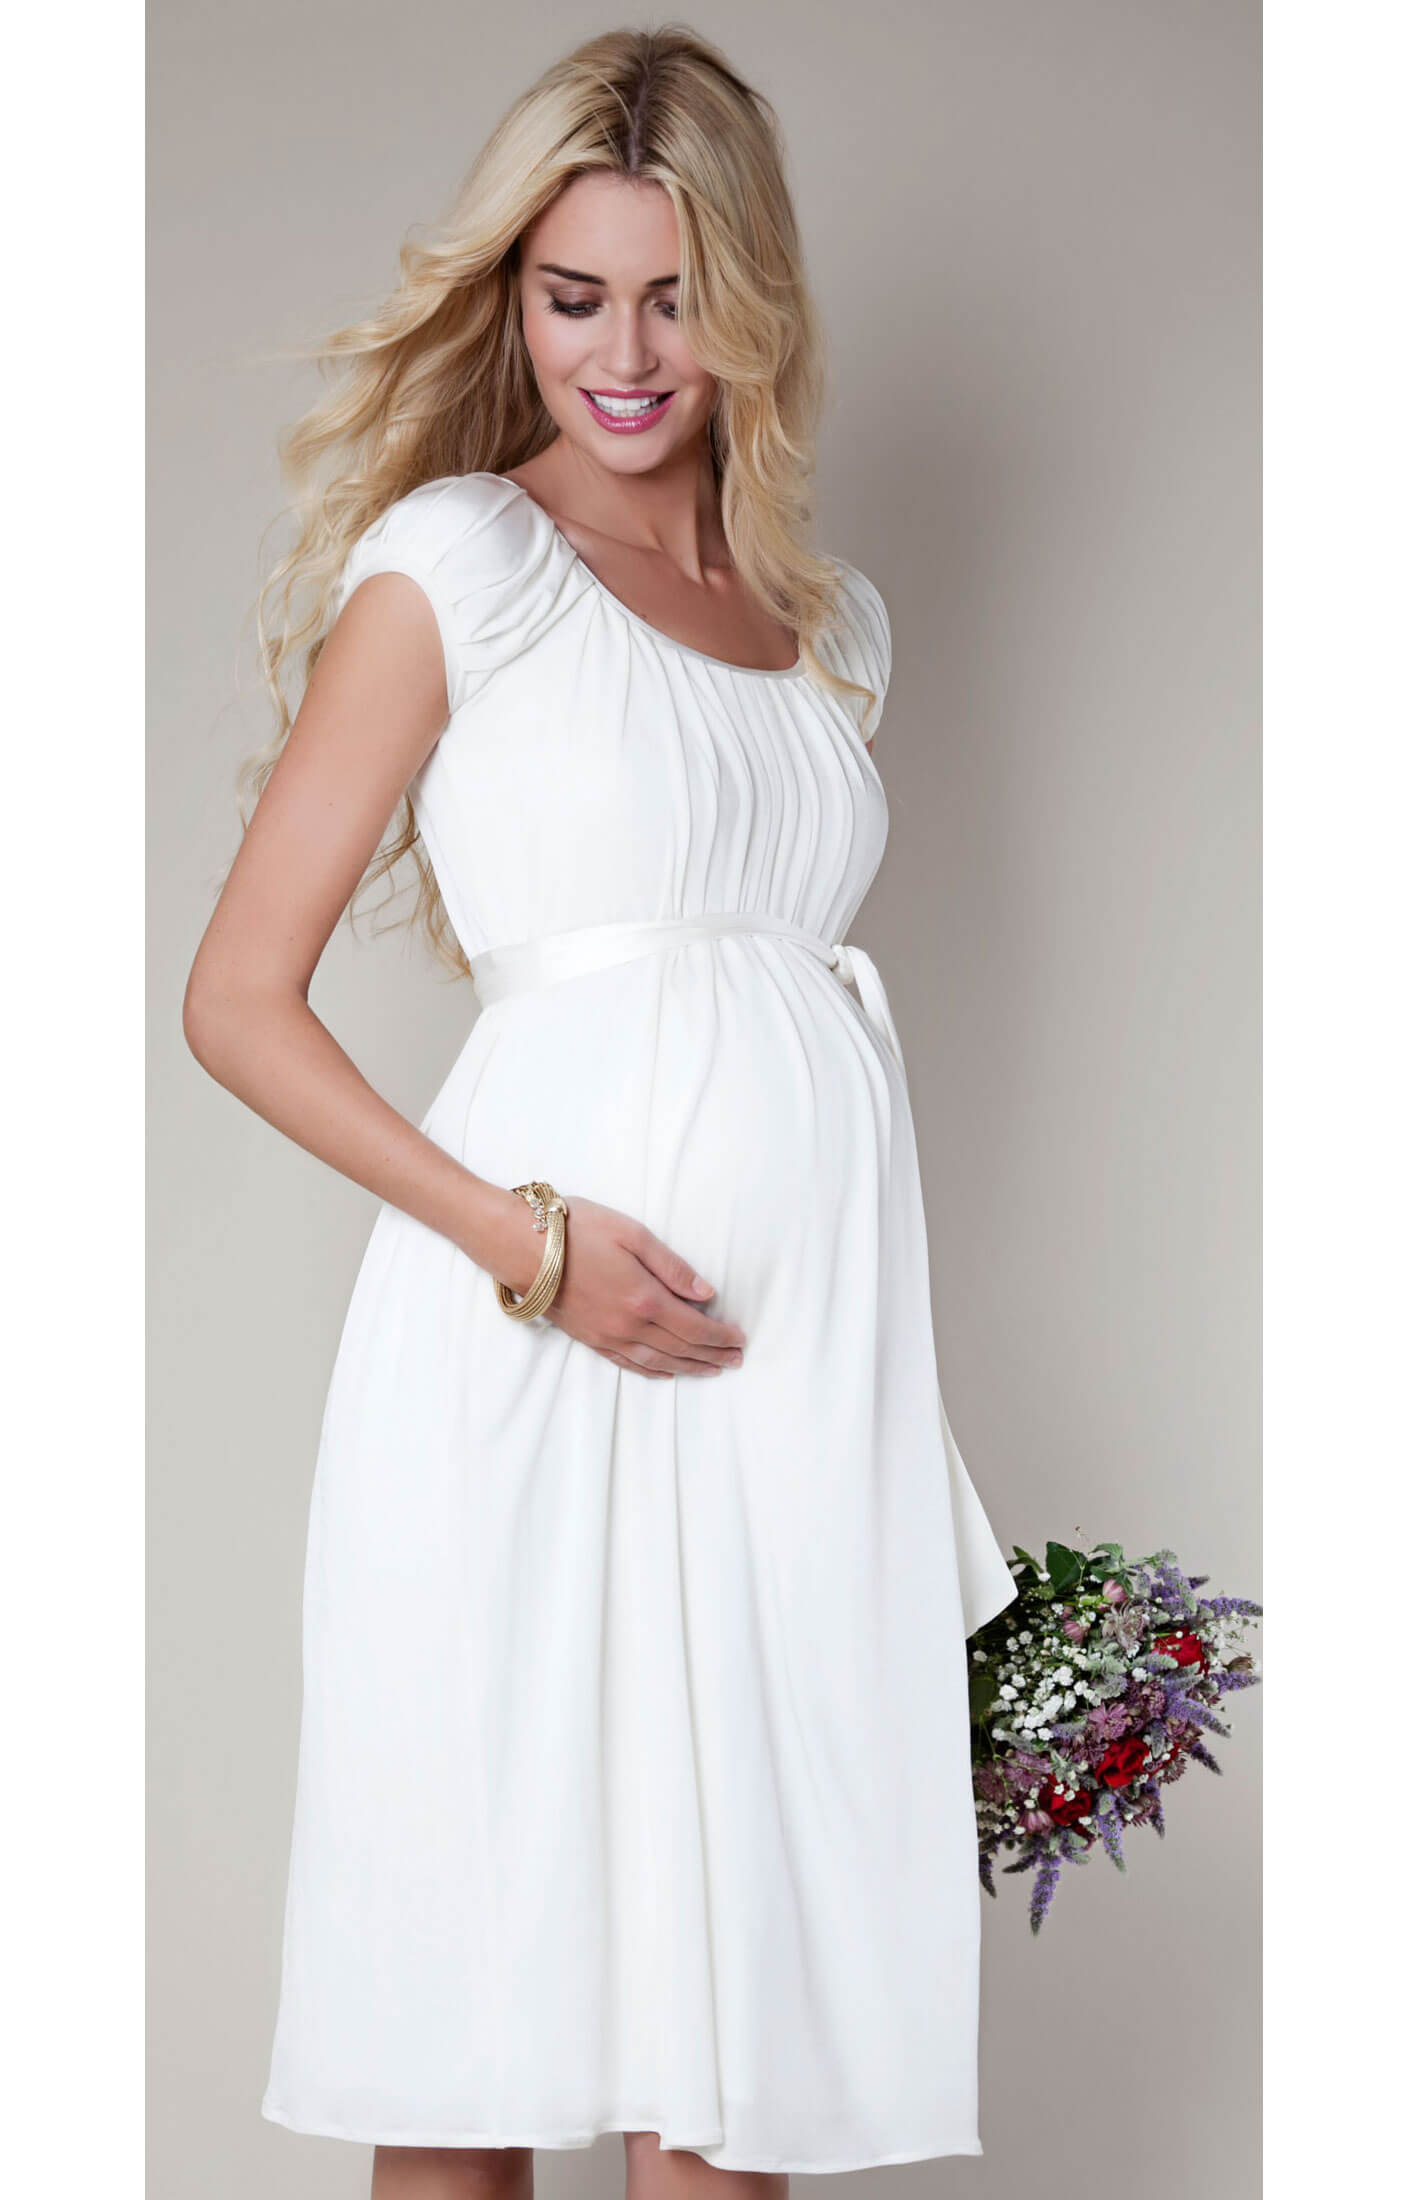 Details More Than 157 White Long Sleeve Maternity Gown Vn